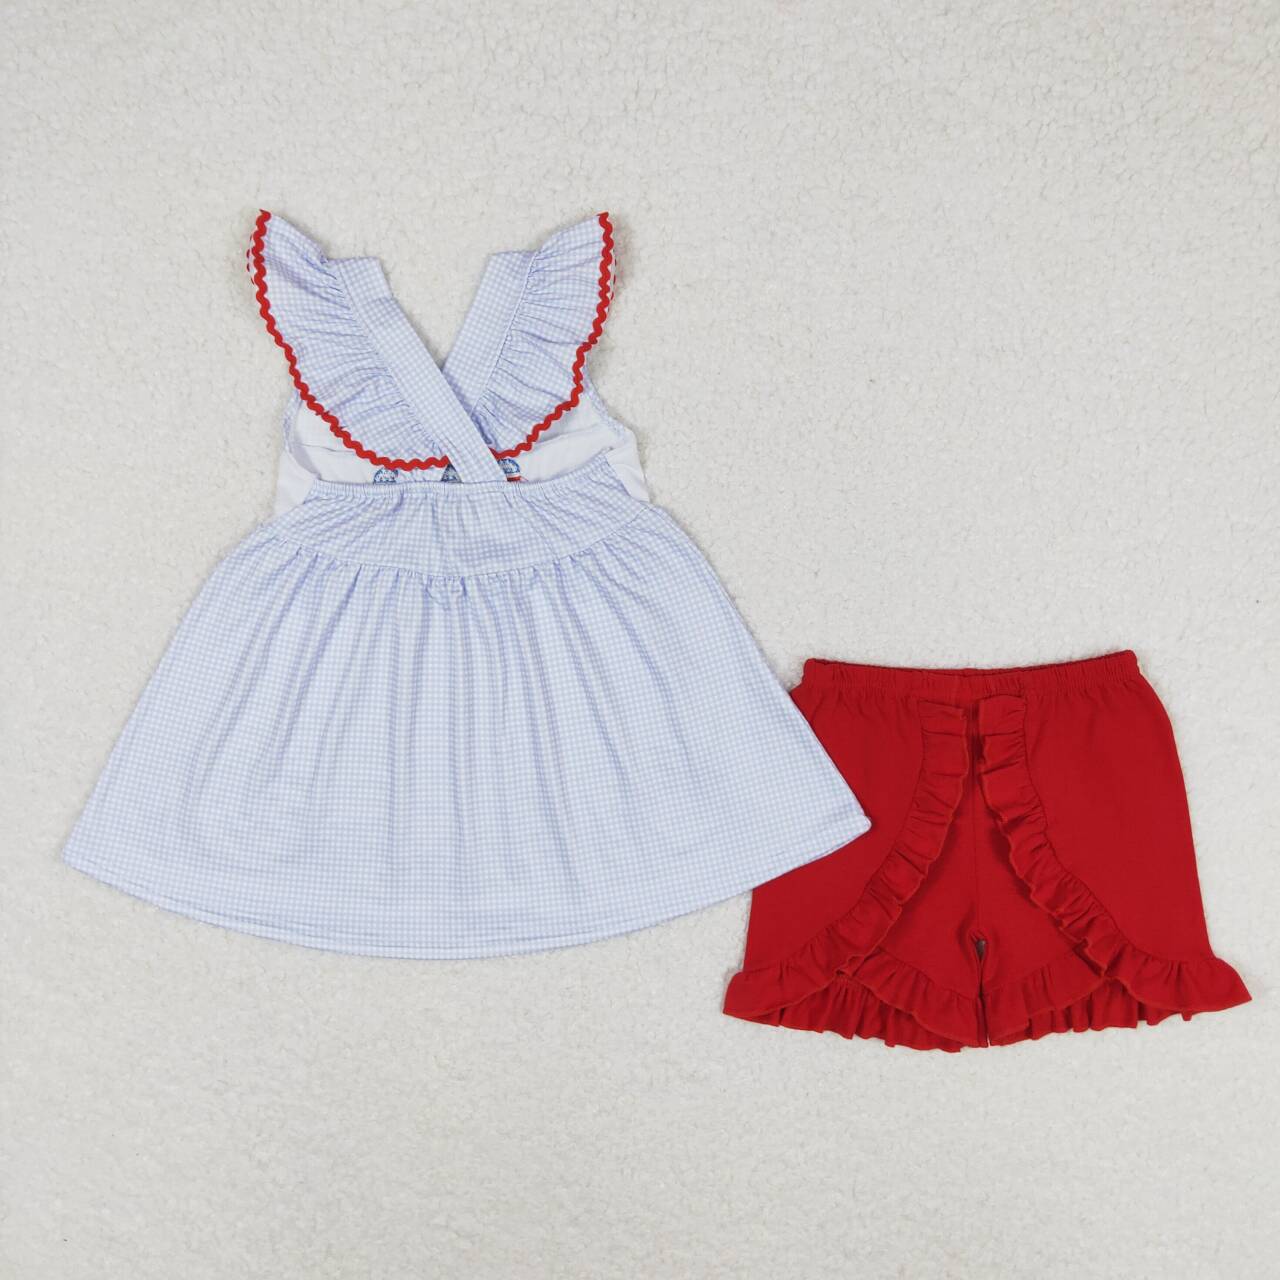 July 4th Girls Clothing Popsicle Top Matching Red Shorts Set